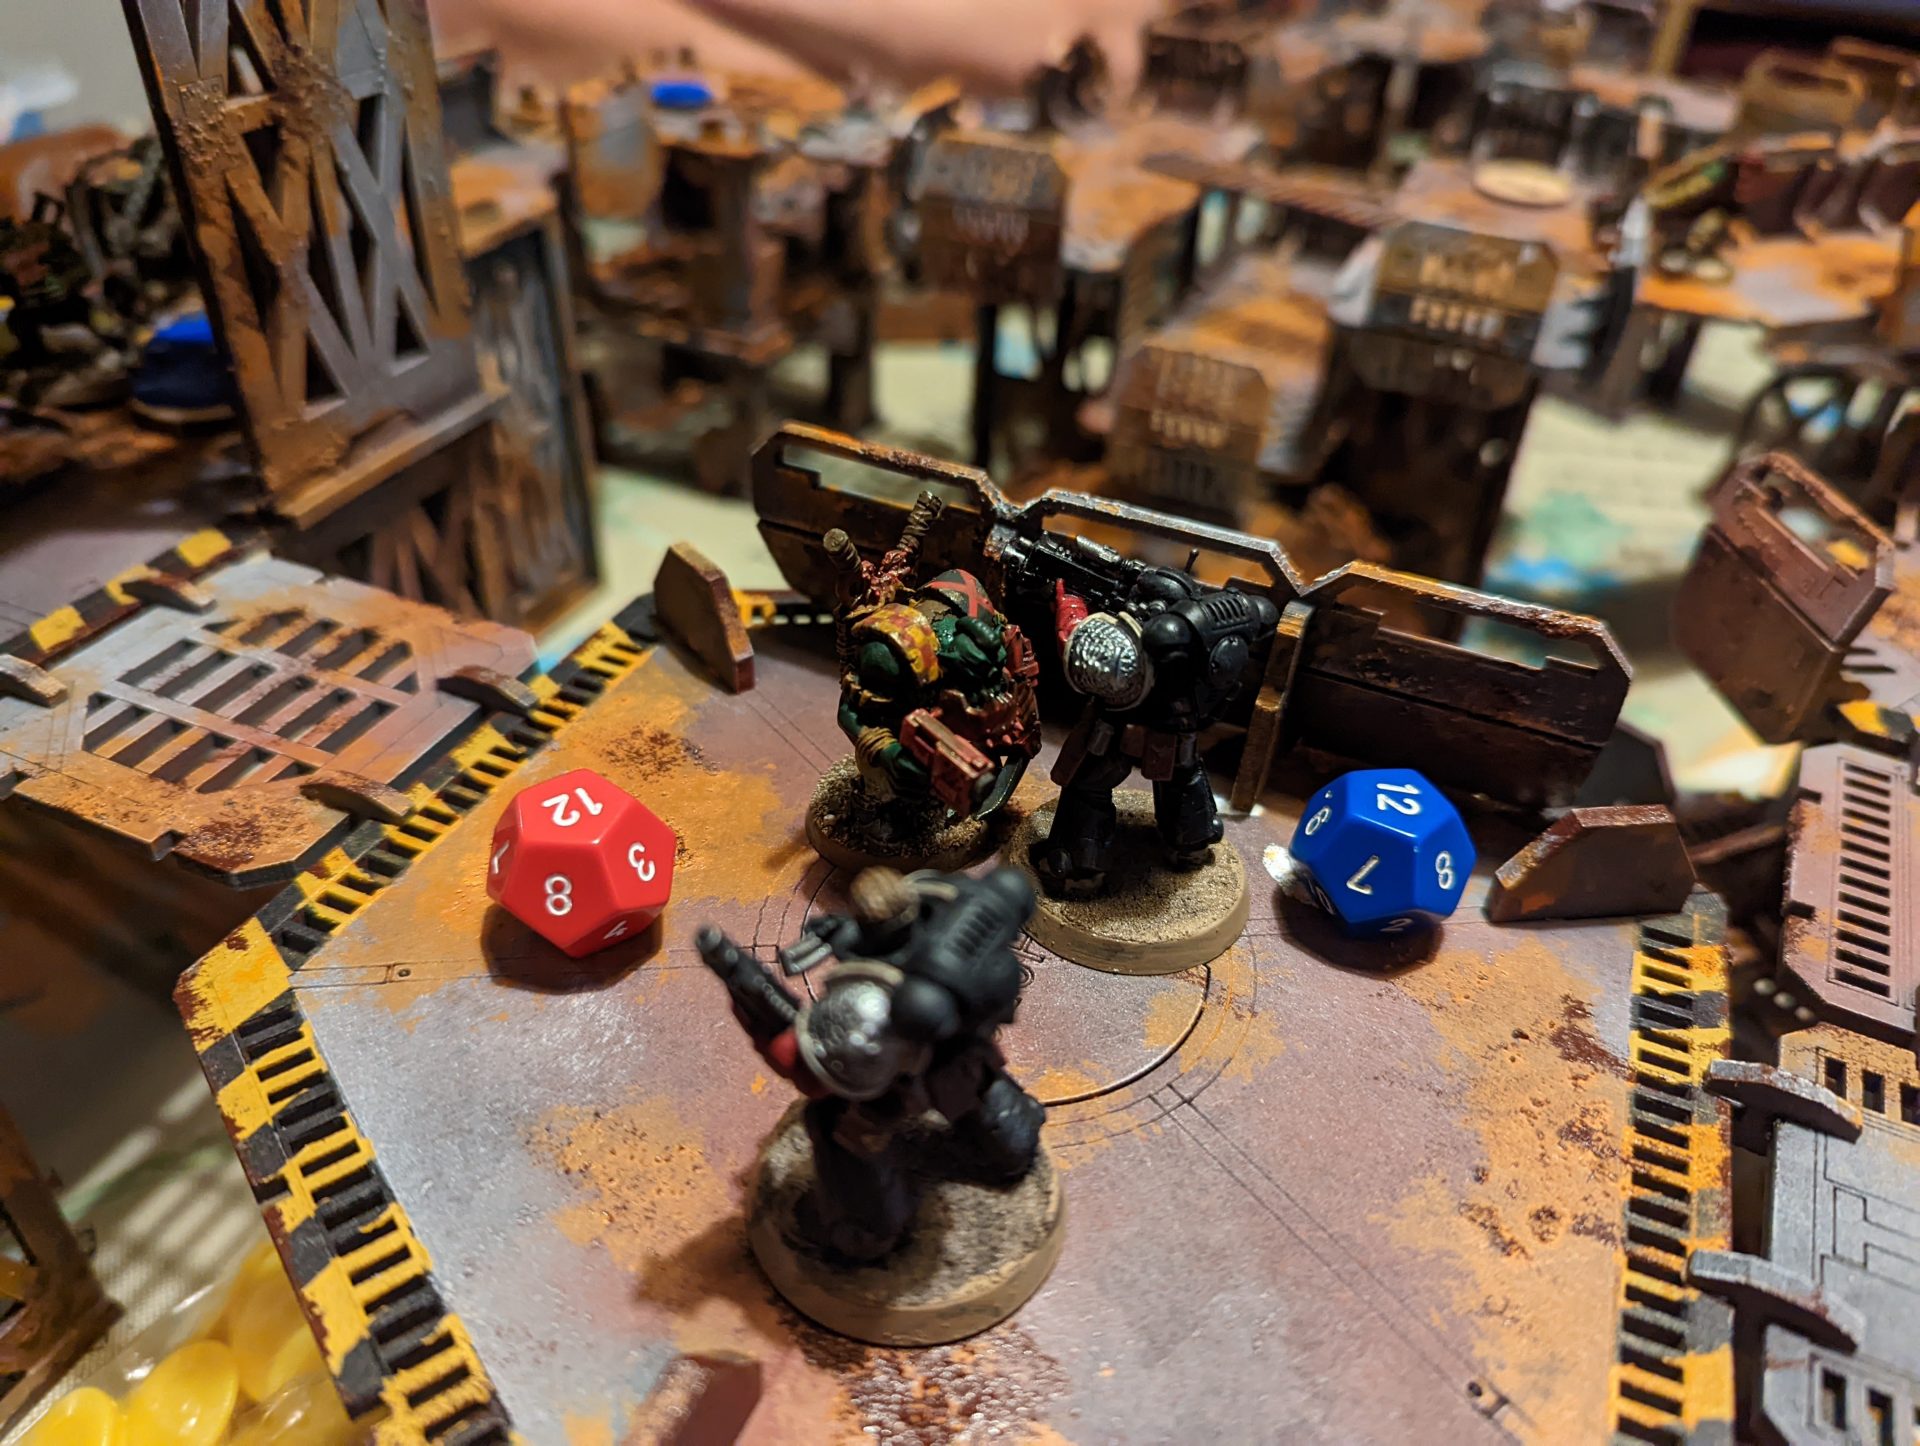 The Dastardly Opponent Strikes Again – And this time, it’s Killteam